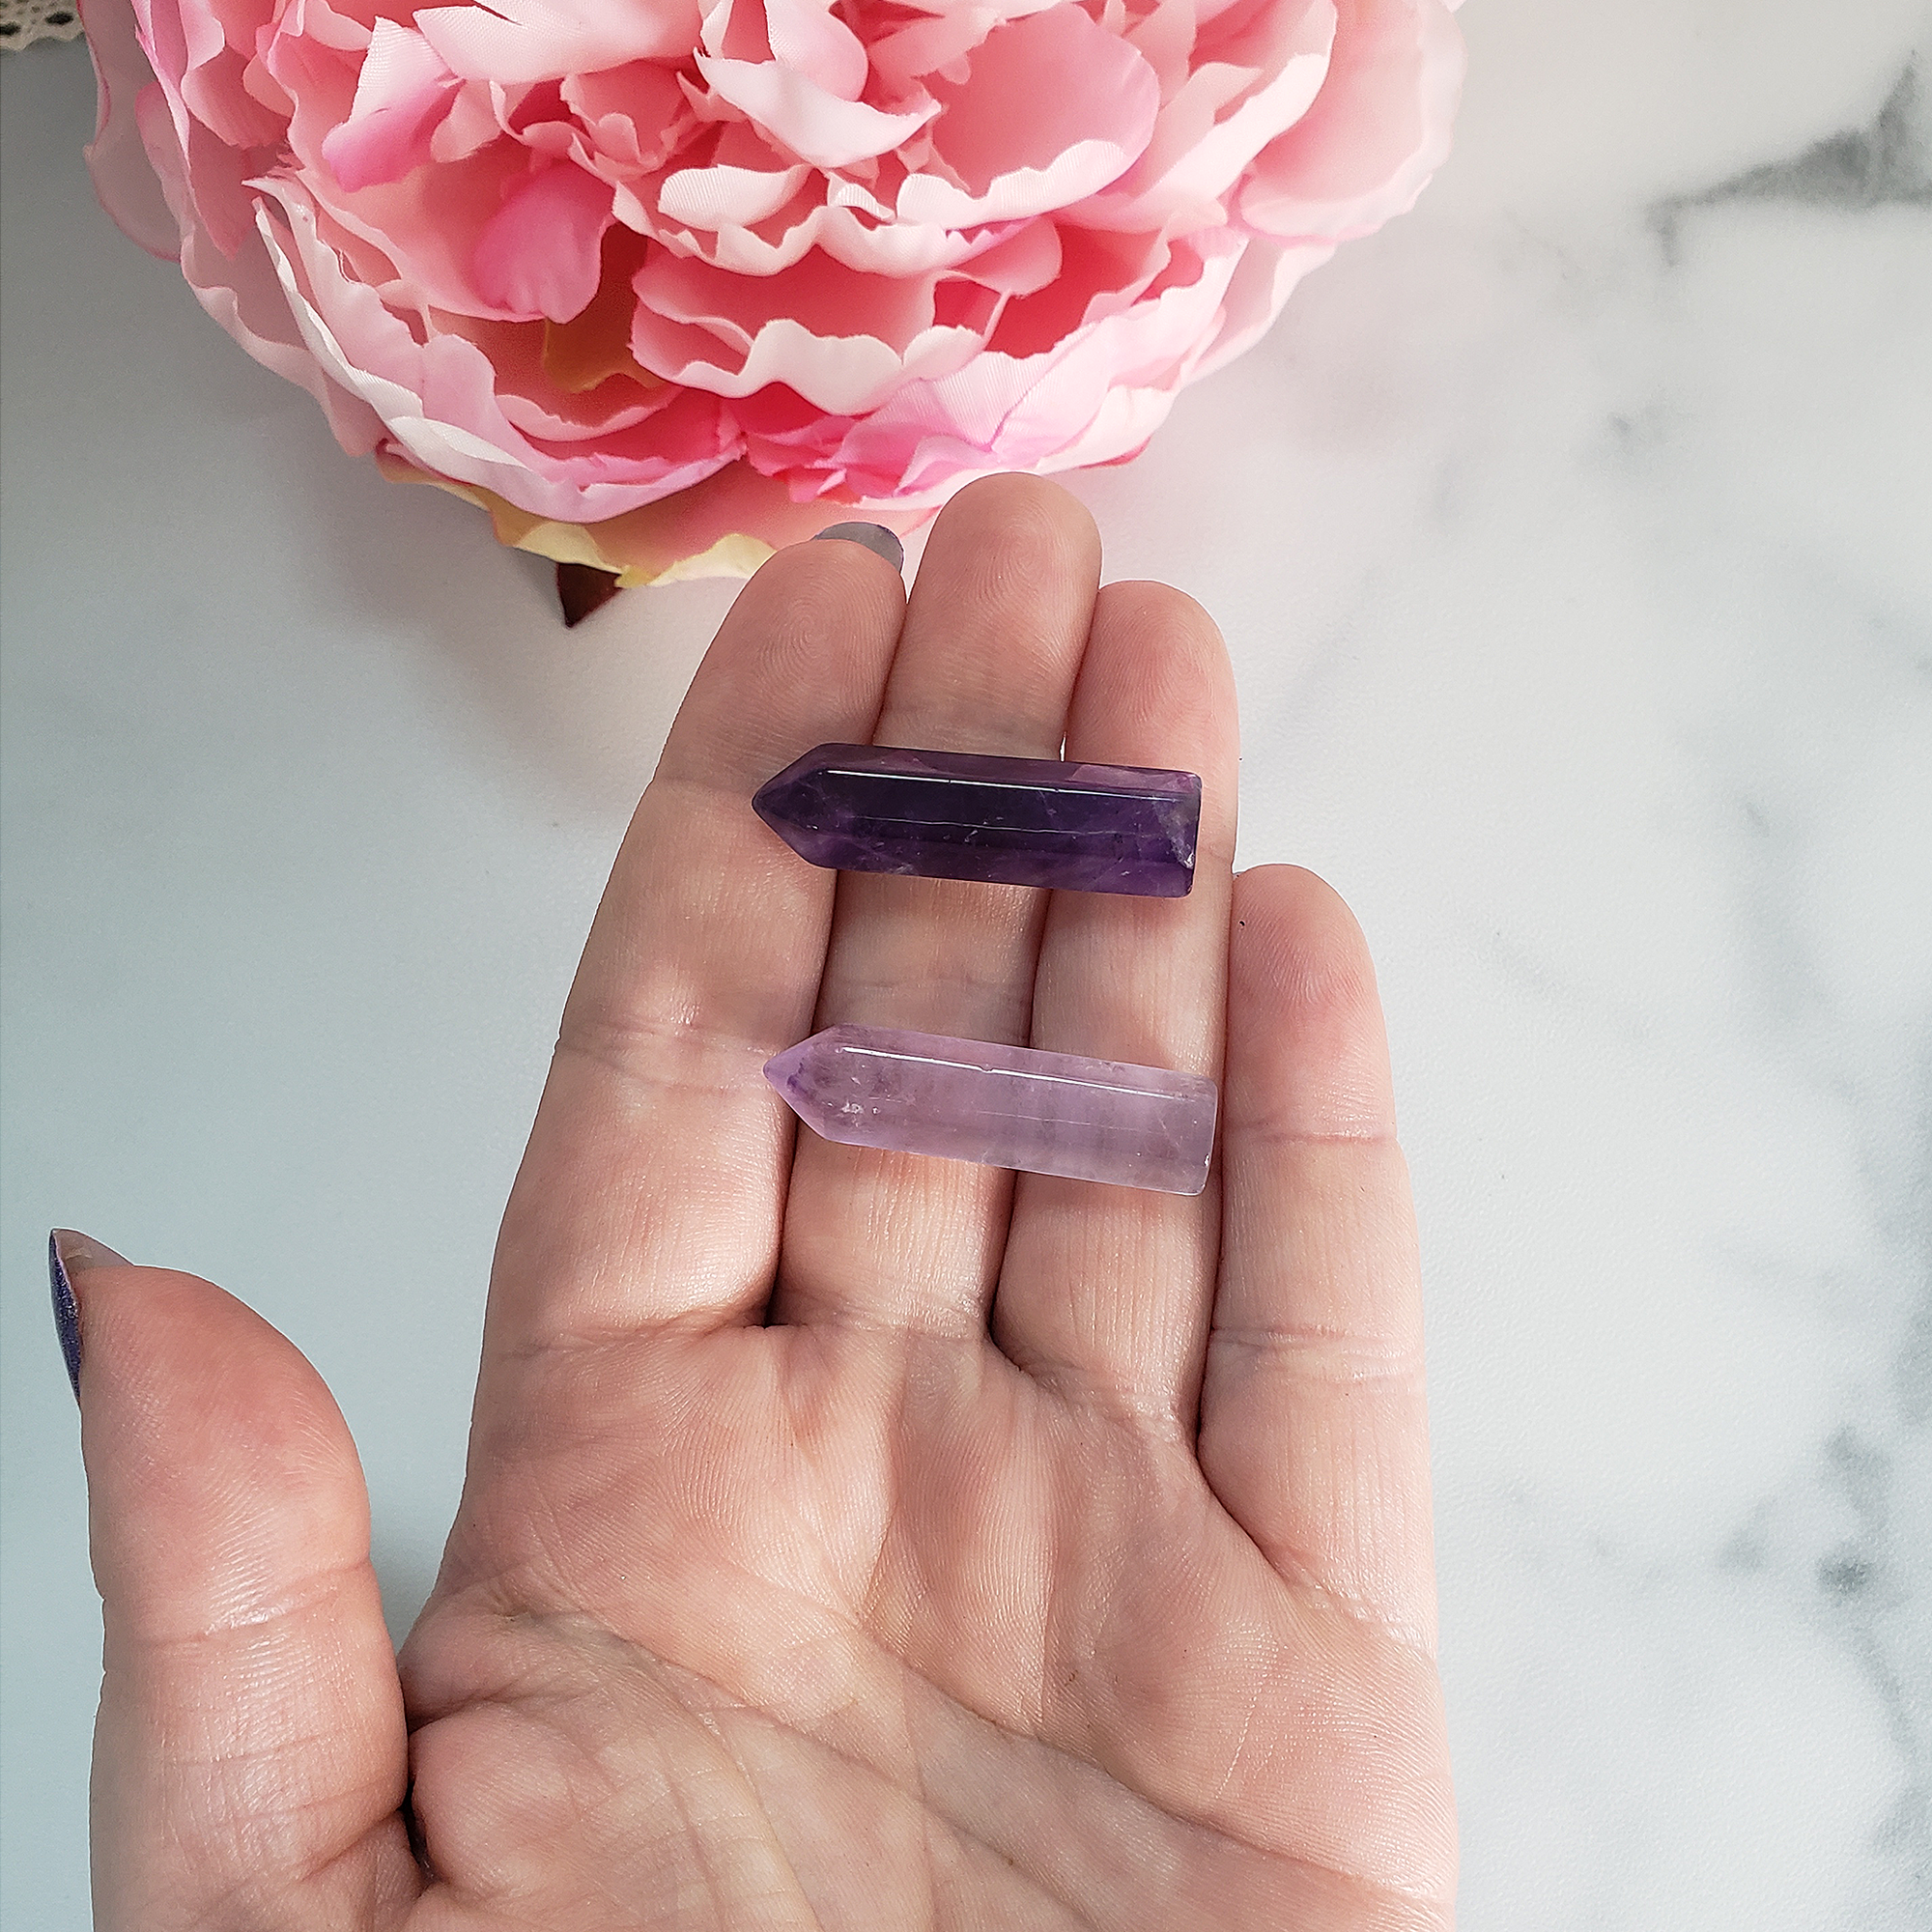 Amethyst Crystal Natural Gemstone Tower Point | MINI - Amethyst Stone Towers in Hand